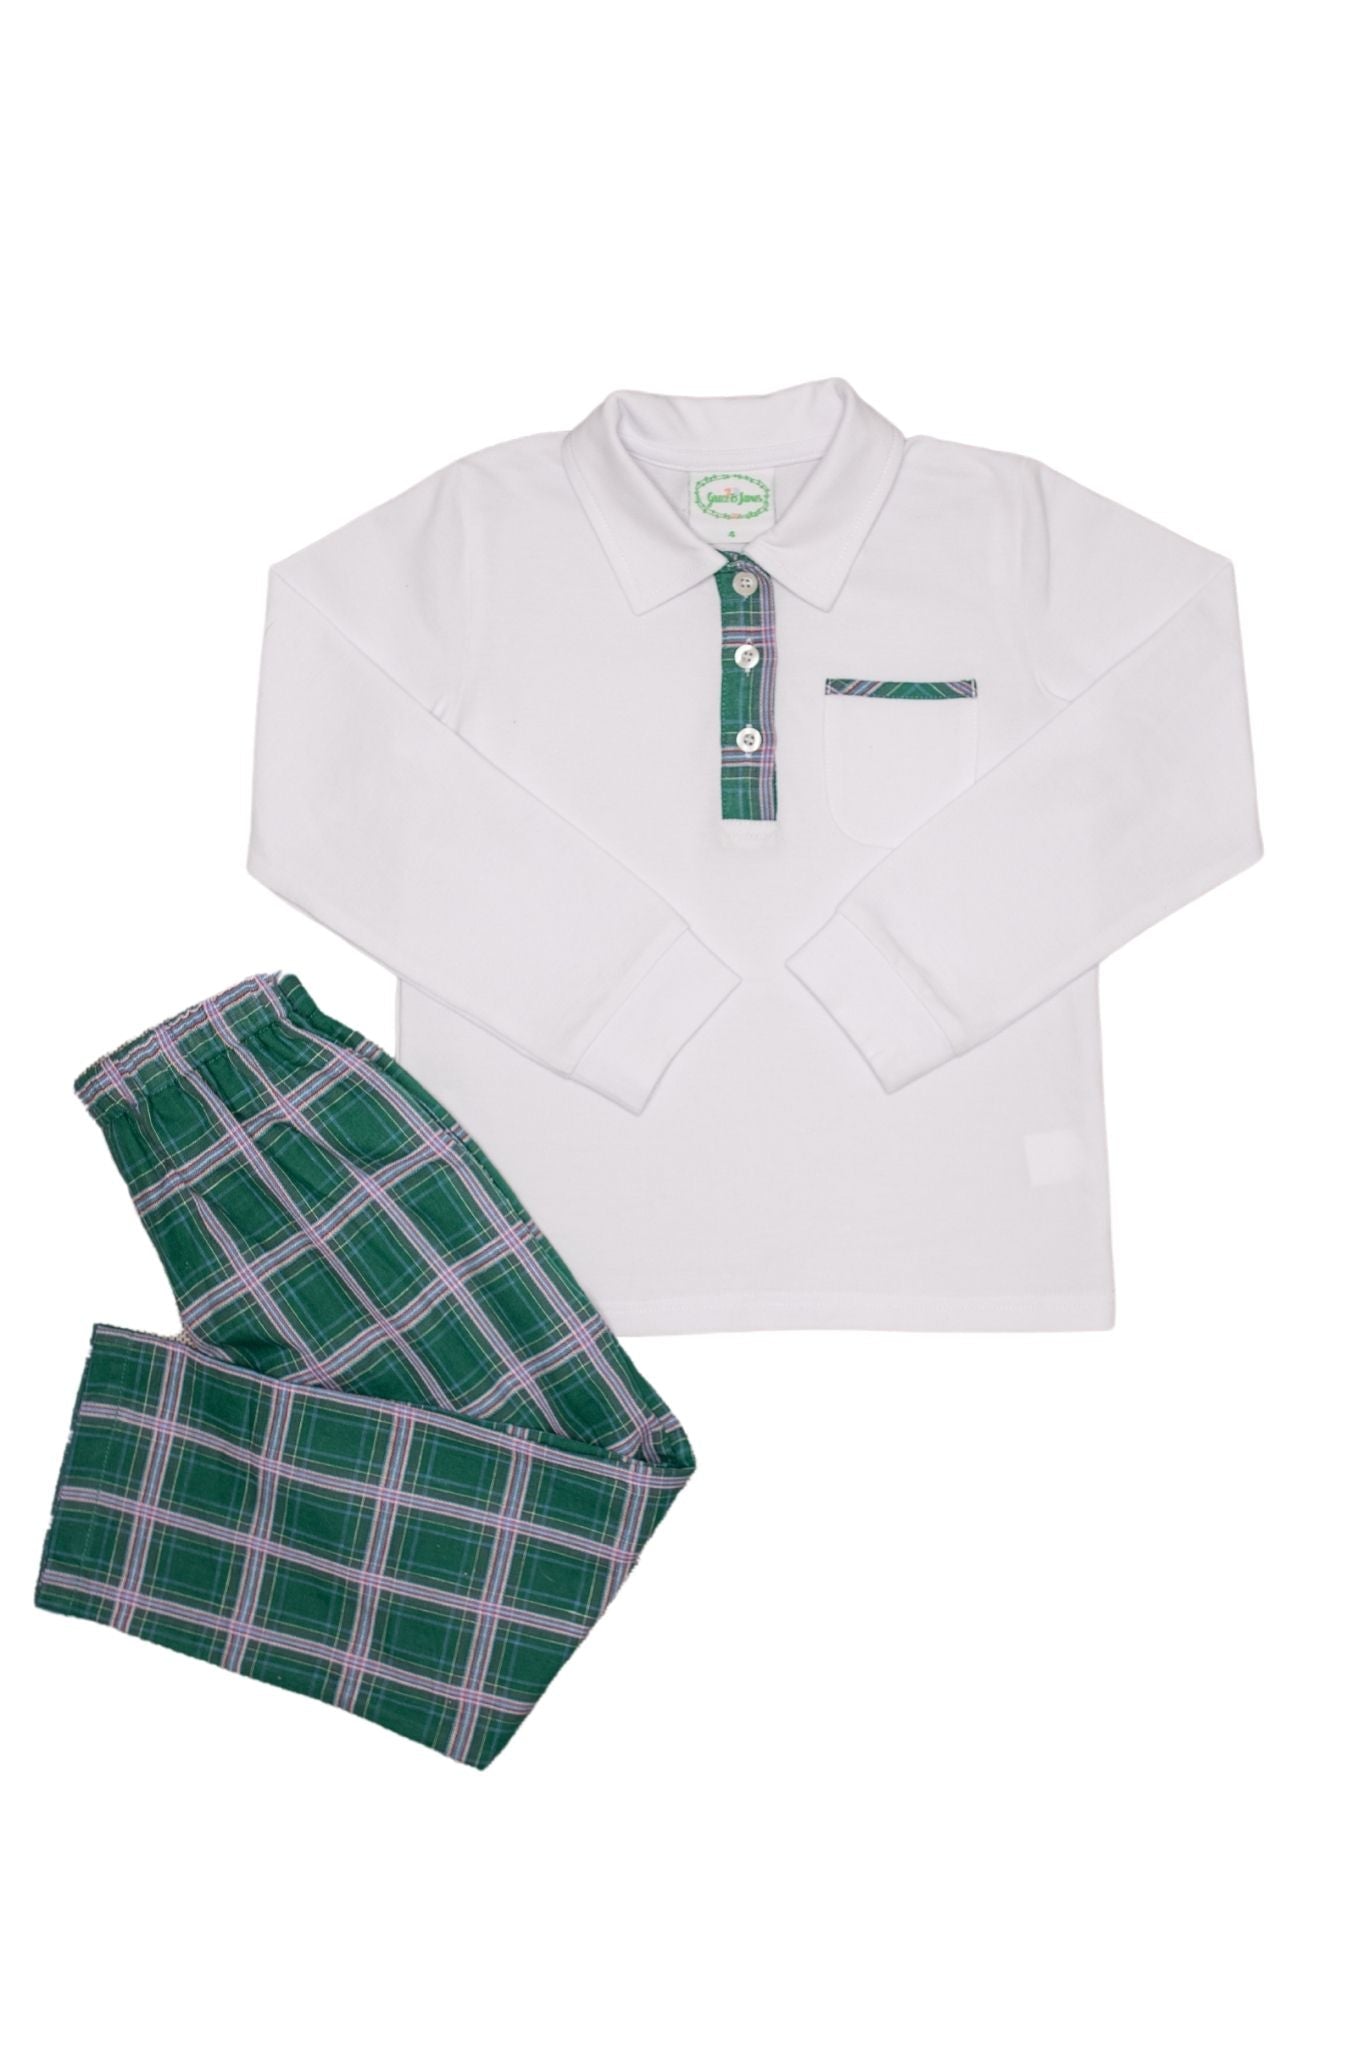 White Collared Long Sleeve Shirt and Campbell Plaid Pants